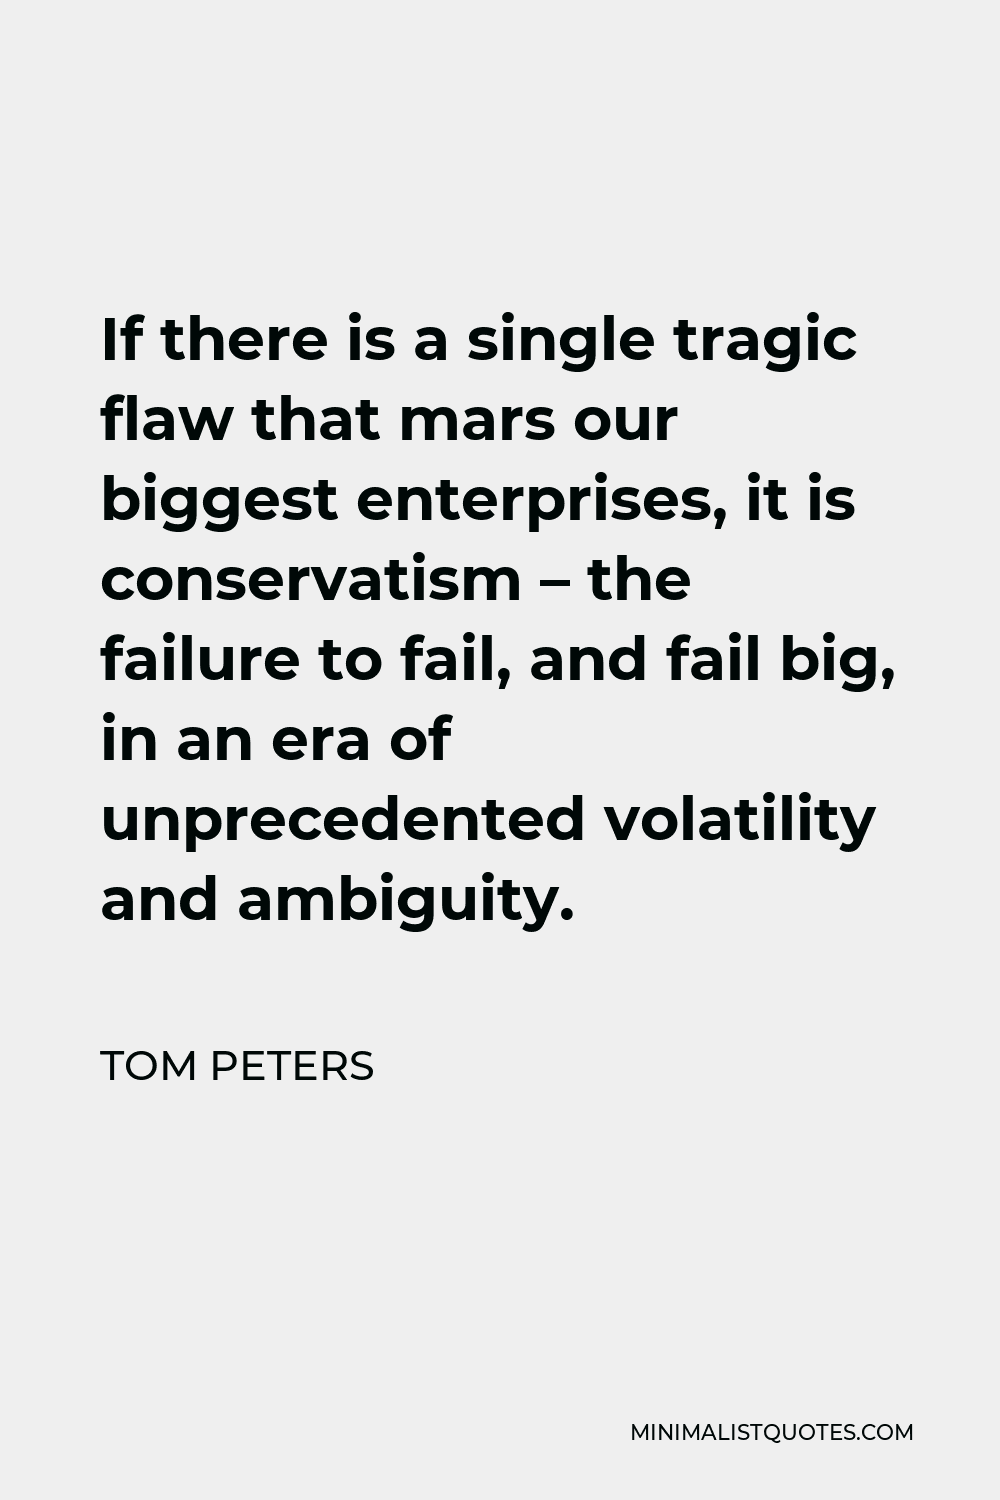 Tom Peters Quote - If there is a single tragic flaw that mars our biggest enterprises, it is conservatism – the failure to fail, and fail big, in an era of unprecedented volatility and ambiguity.